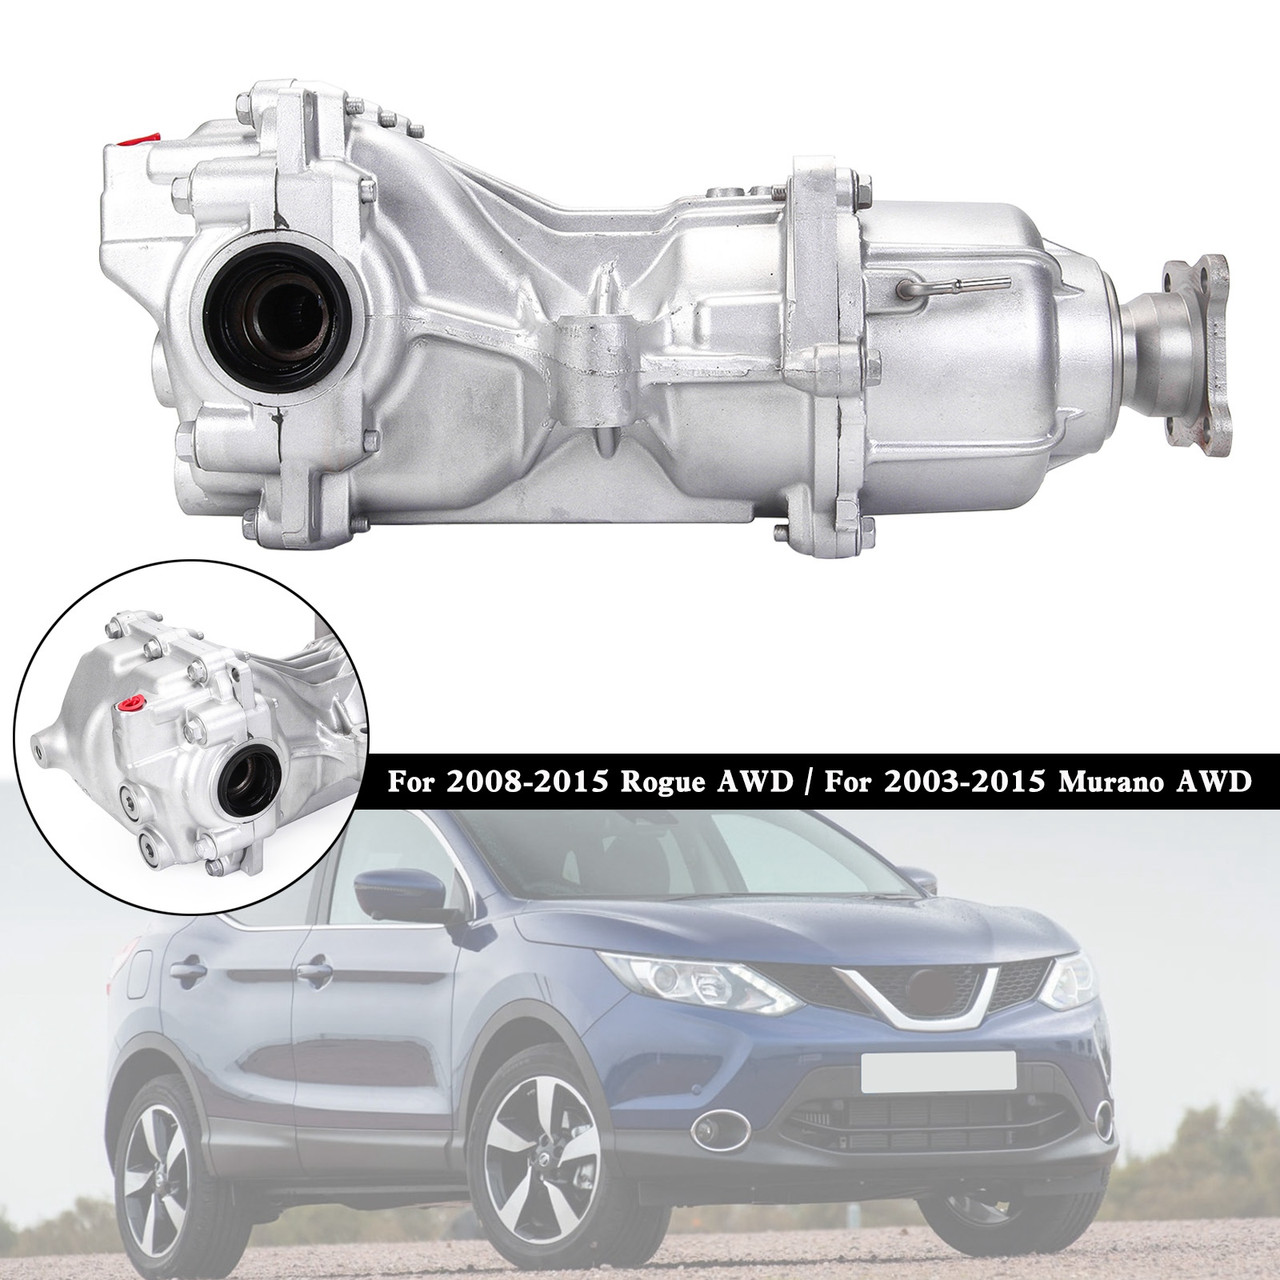 Differential Final Drive Rear 38310CA000 For Nissan X-Trail Qashqai Renault AWD 4WD 2006-2015